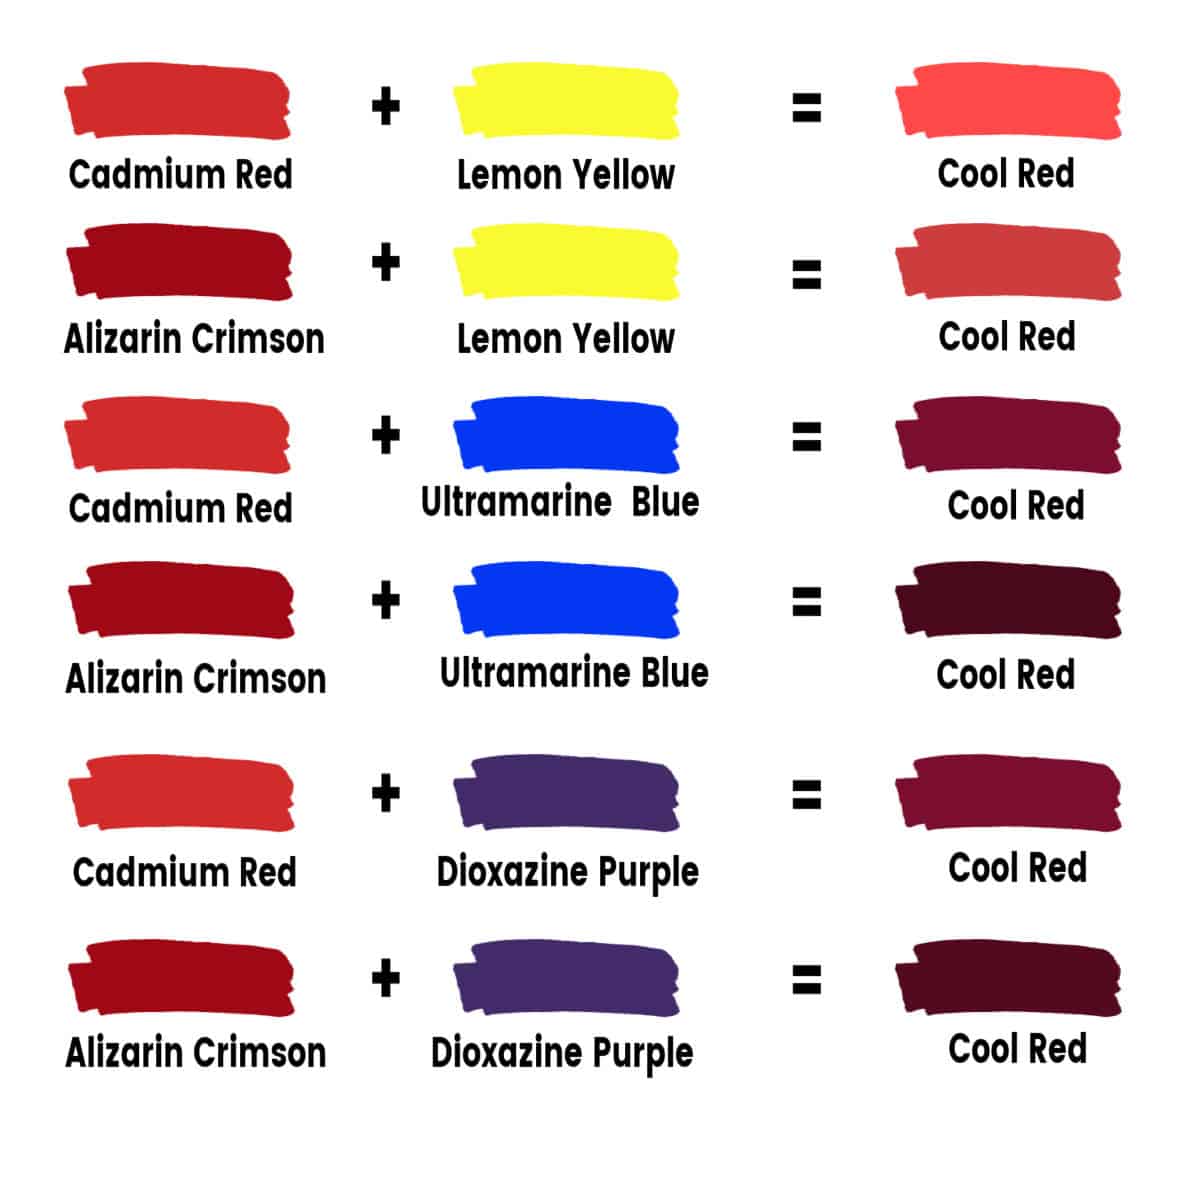 Color mixing chart showing how to mix cool red paint.